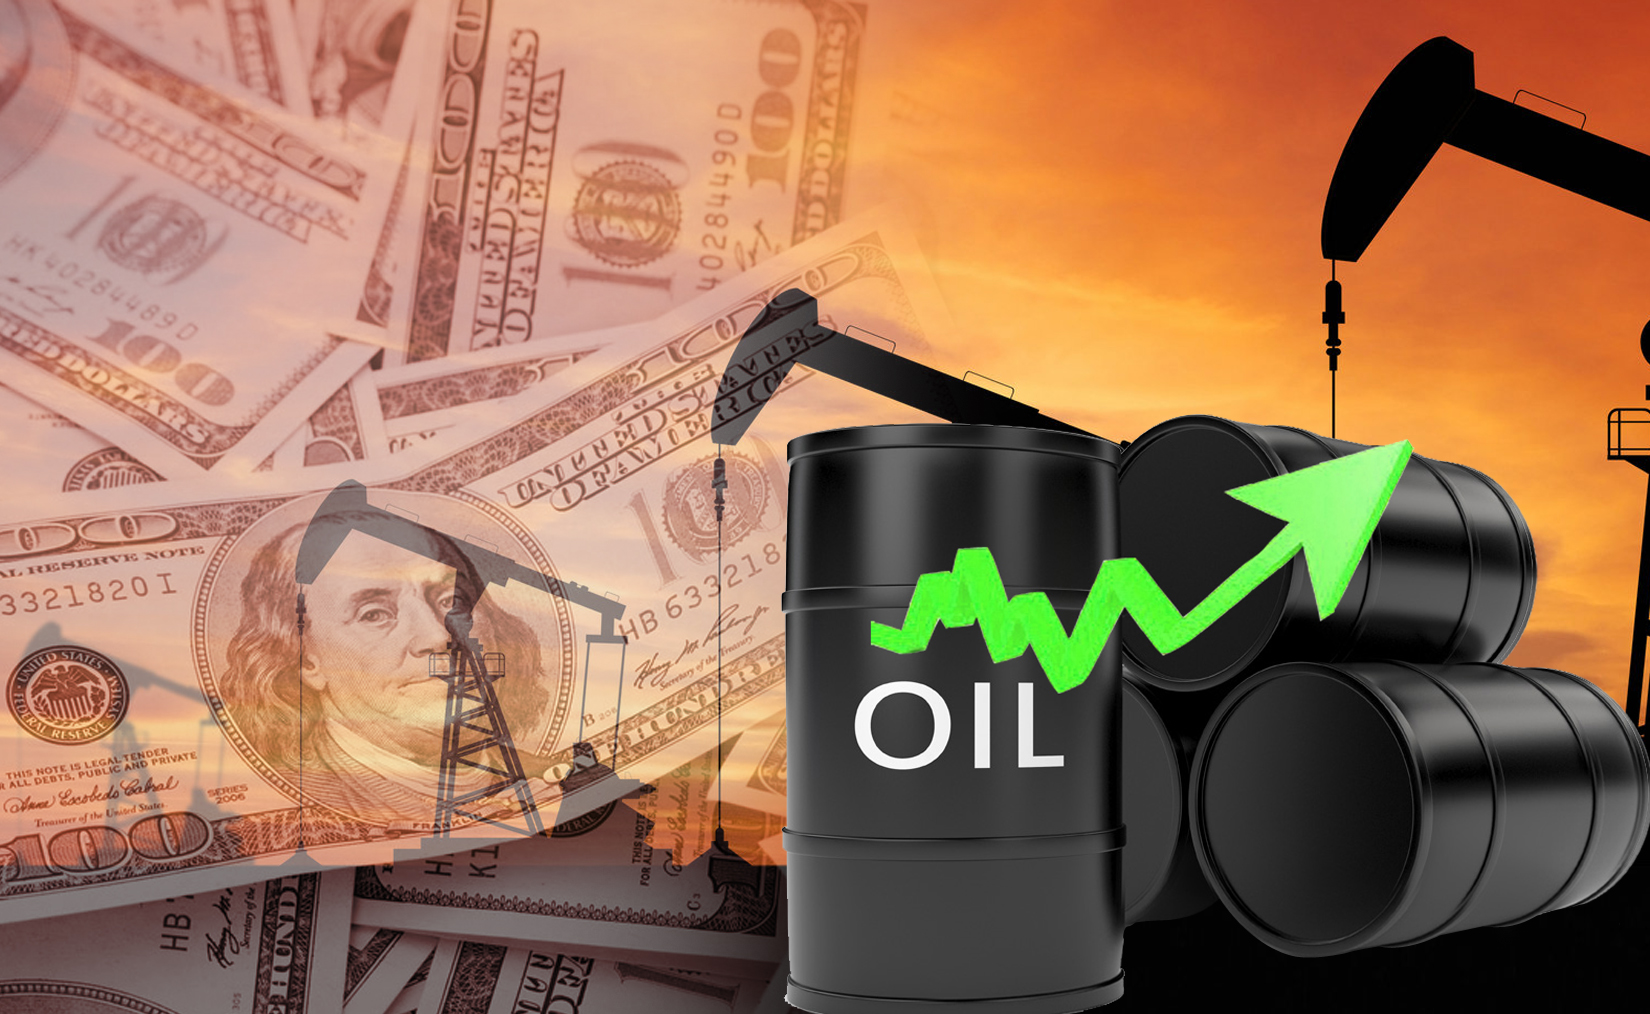 Kuwait oil price up 93 cents to USD 61.54 pb                                                                                                                                                                                                              